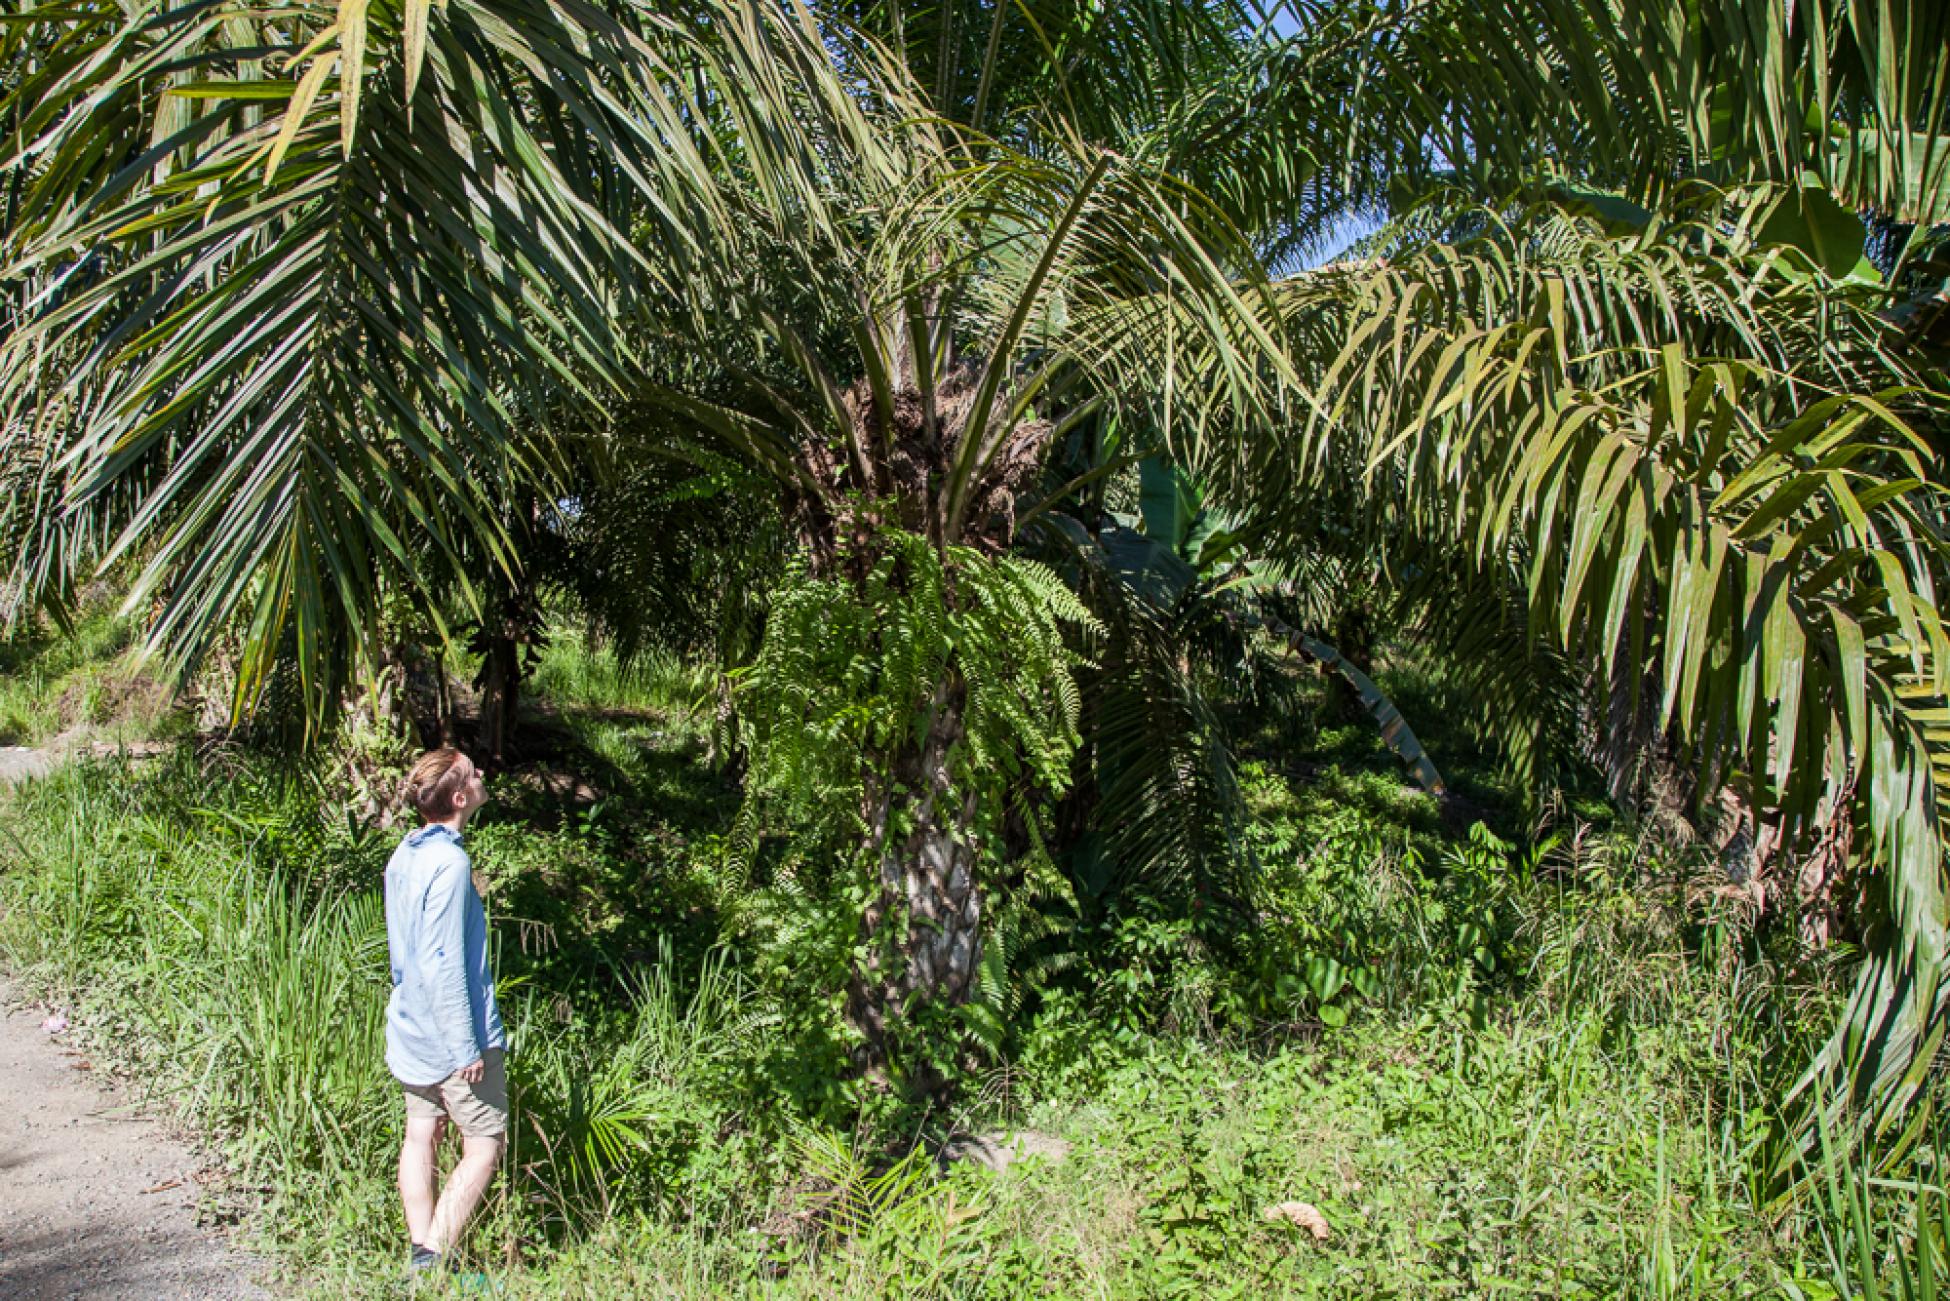 Palm oil trees will fruit for 30 years, providing a much needed income for some of the poorest parts of Malaysia.